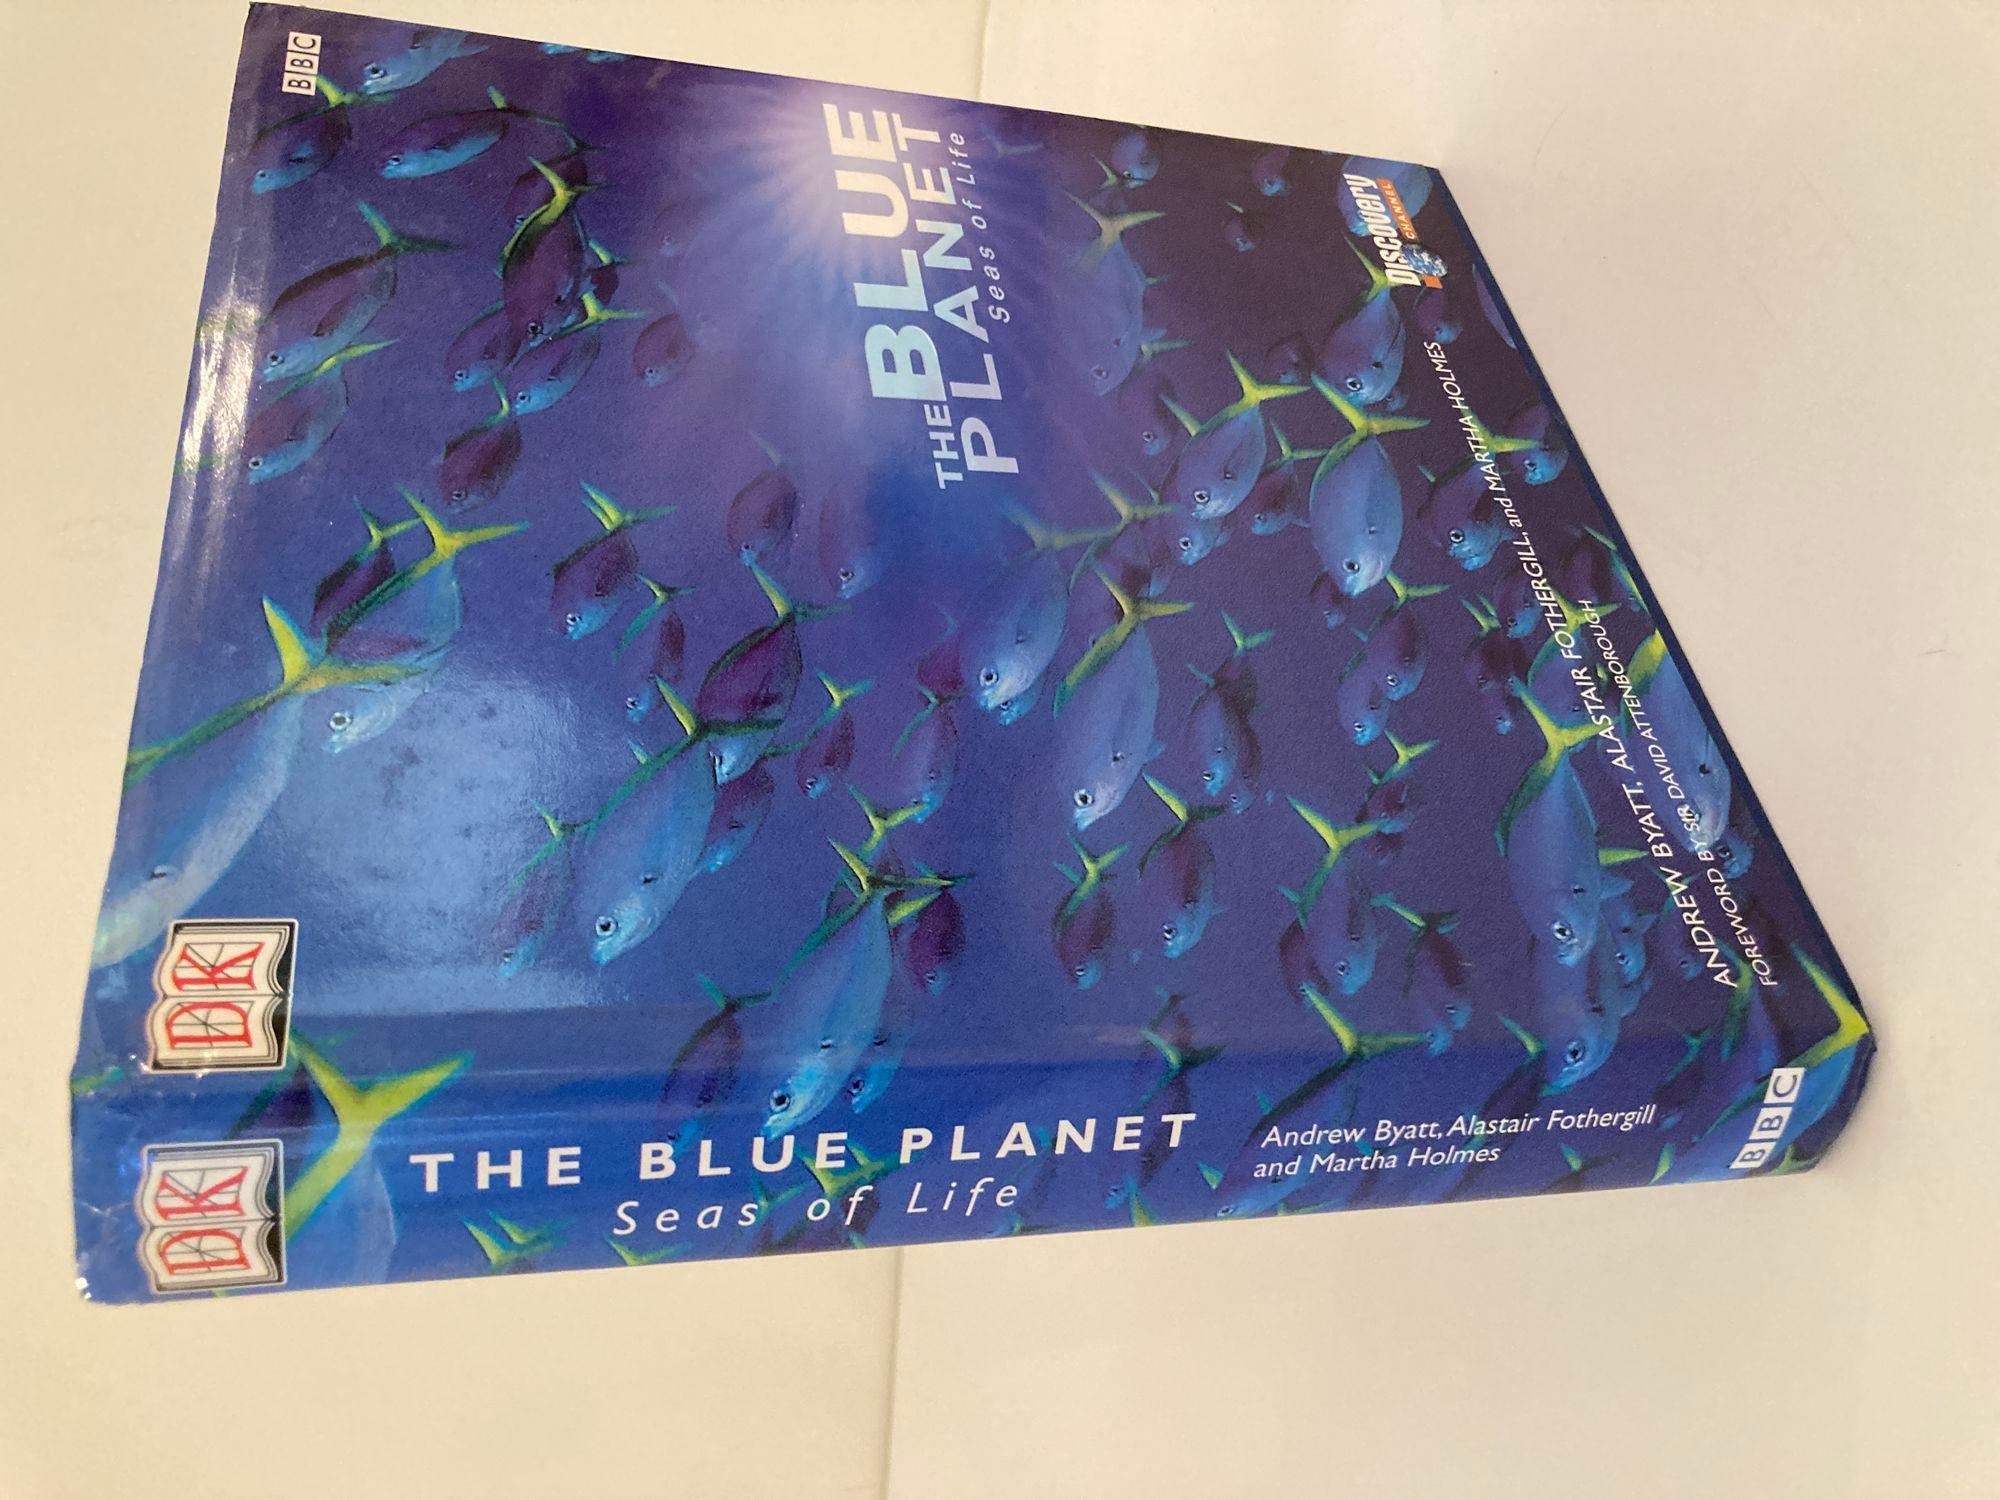 The Blue Planet A Natural History of the Oceans.
From space Planet Earth is blue. It floats like a jewel in the inky black void. The reflection of the suns light from the vast expanse of water covering its surface creates its gem-like blue colour.